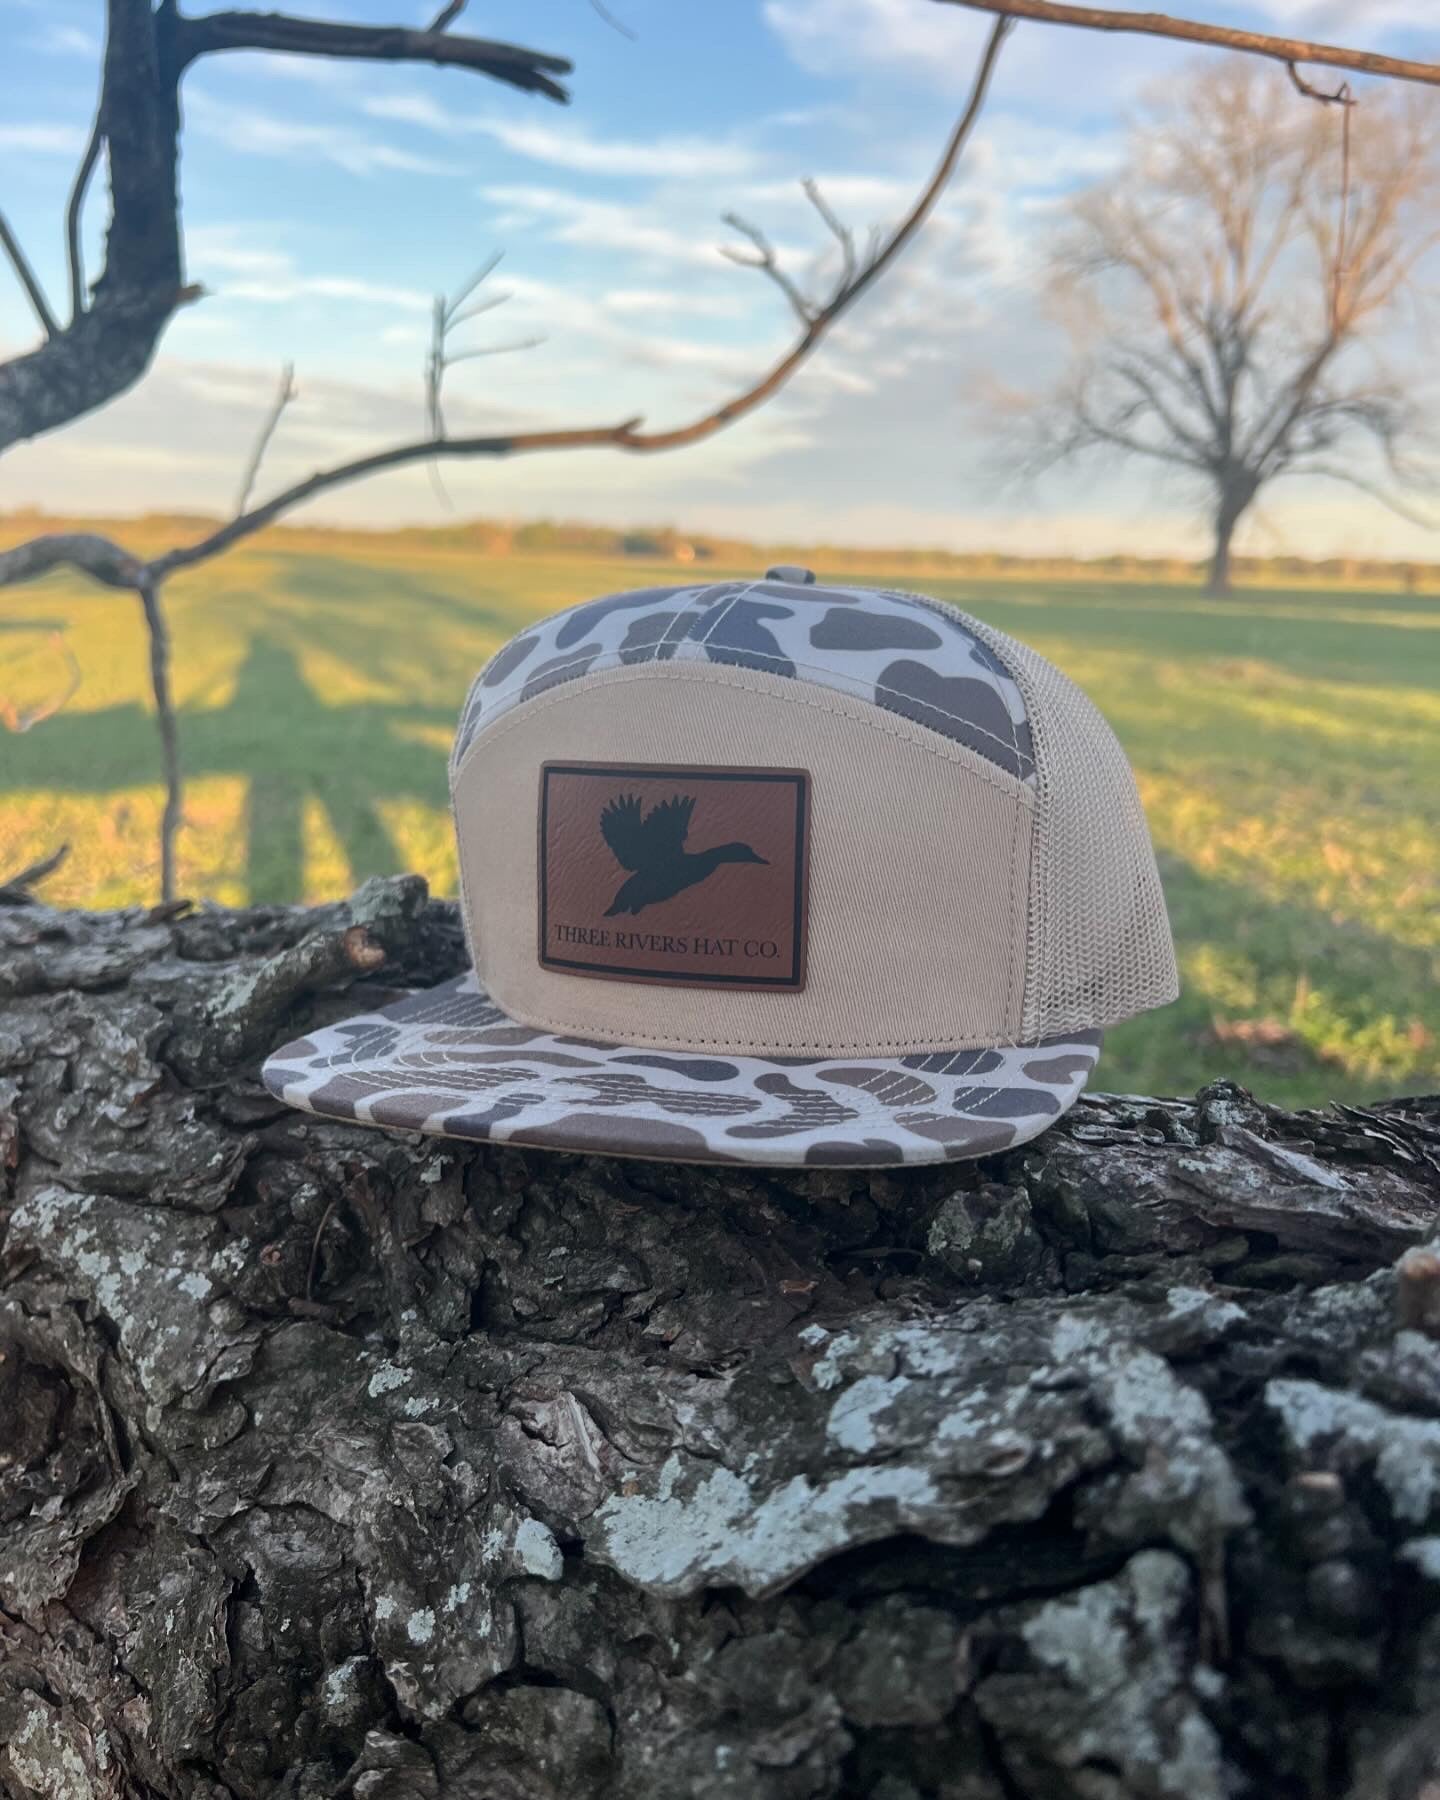 Duck Silhouette - “Old’s Cool” Camo Flatbill Snapback - Lost Hat Co. 7 panel